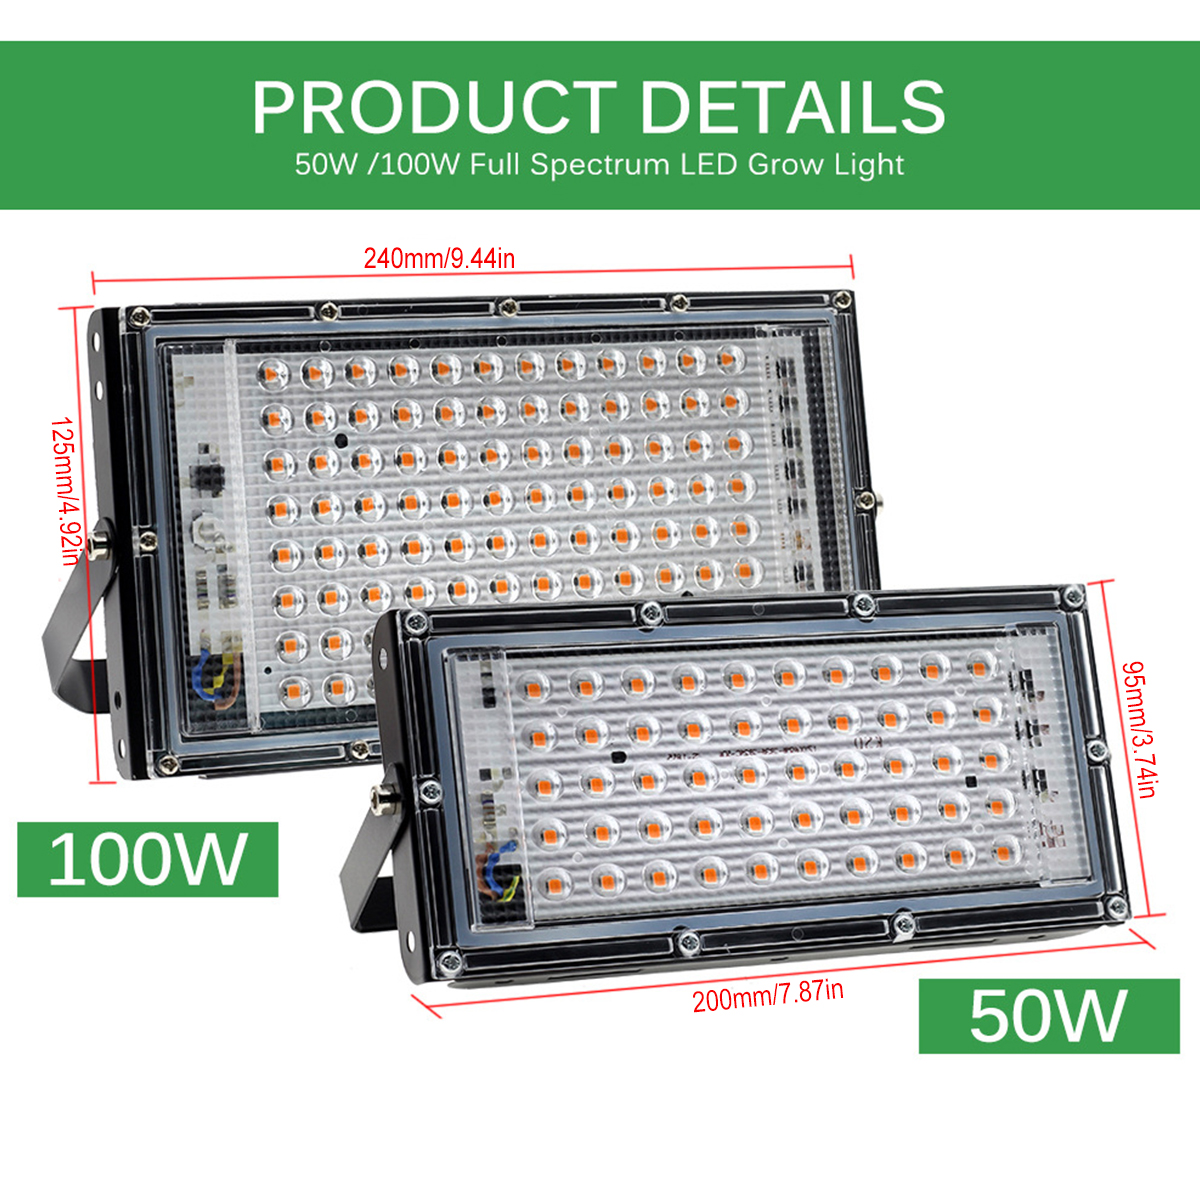 50100W-5096LED-220V-Full-Spectrum-Grow-Light-Plant-Growing-Lamp-Lights-With-Clip-For-Indoor-Plants-1800271-3